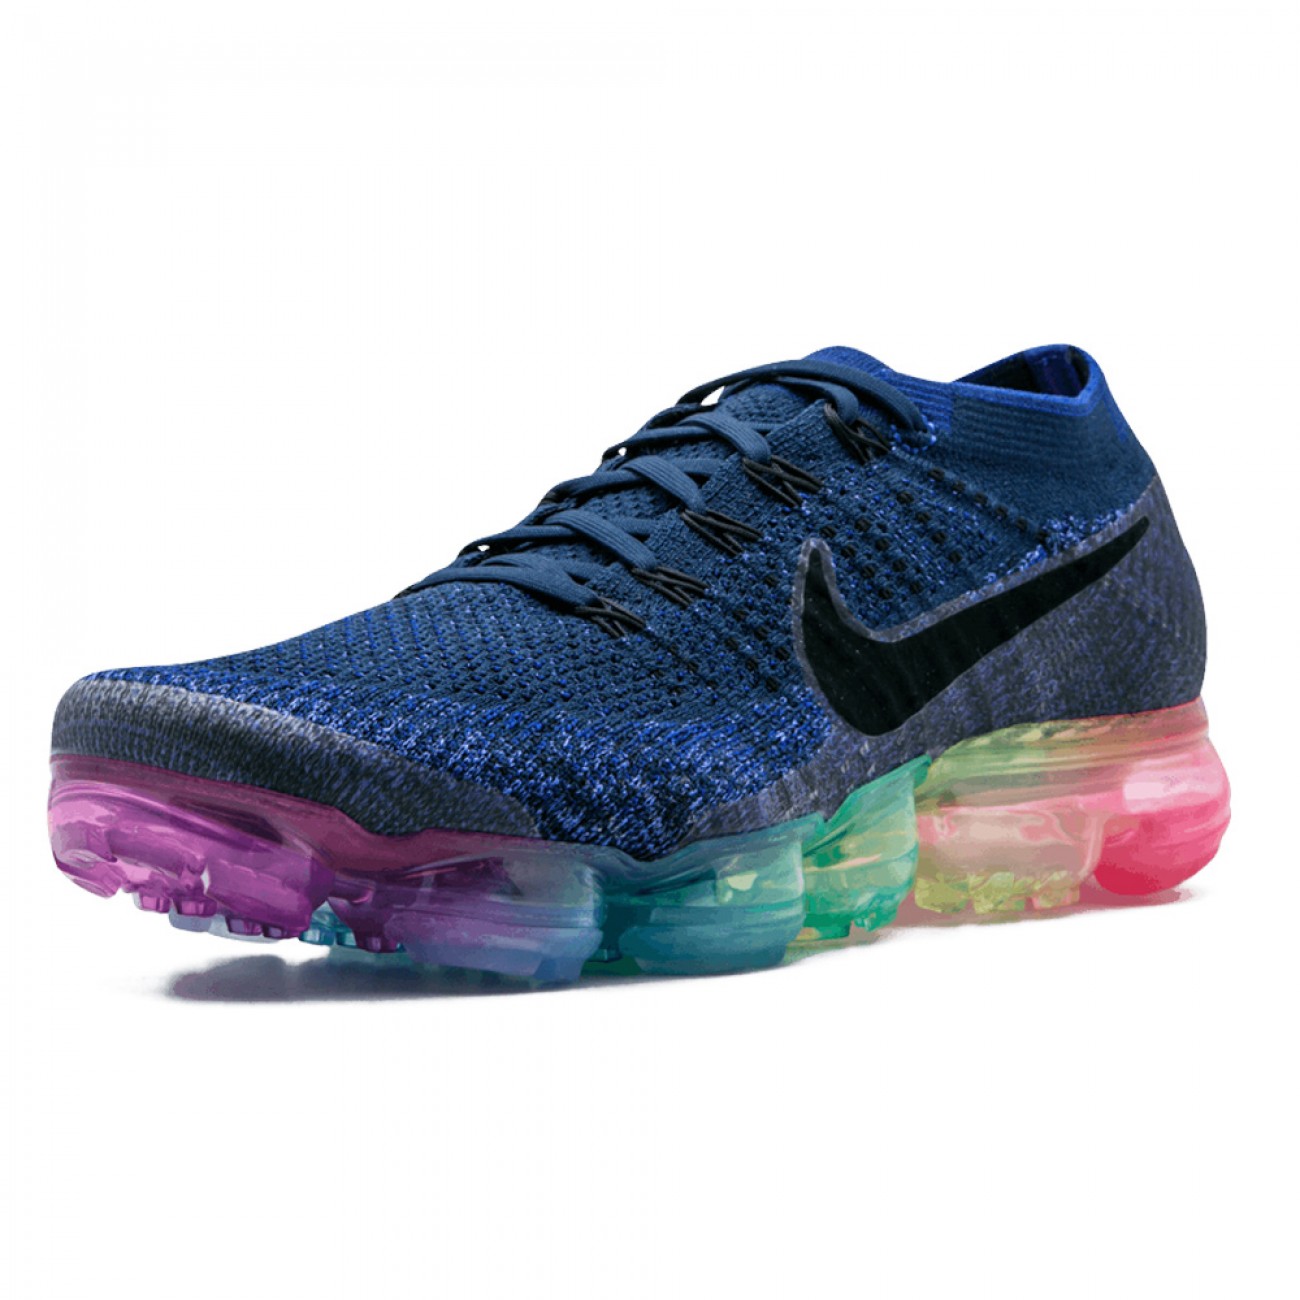 NIKE AIR VAPORMAX FLYKNIT BETRUE TO EQUALITY 2017